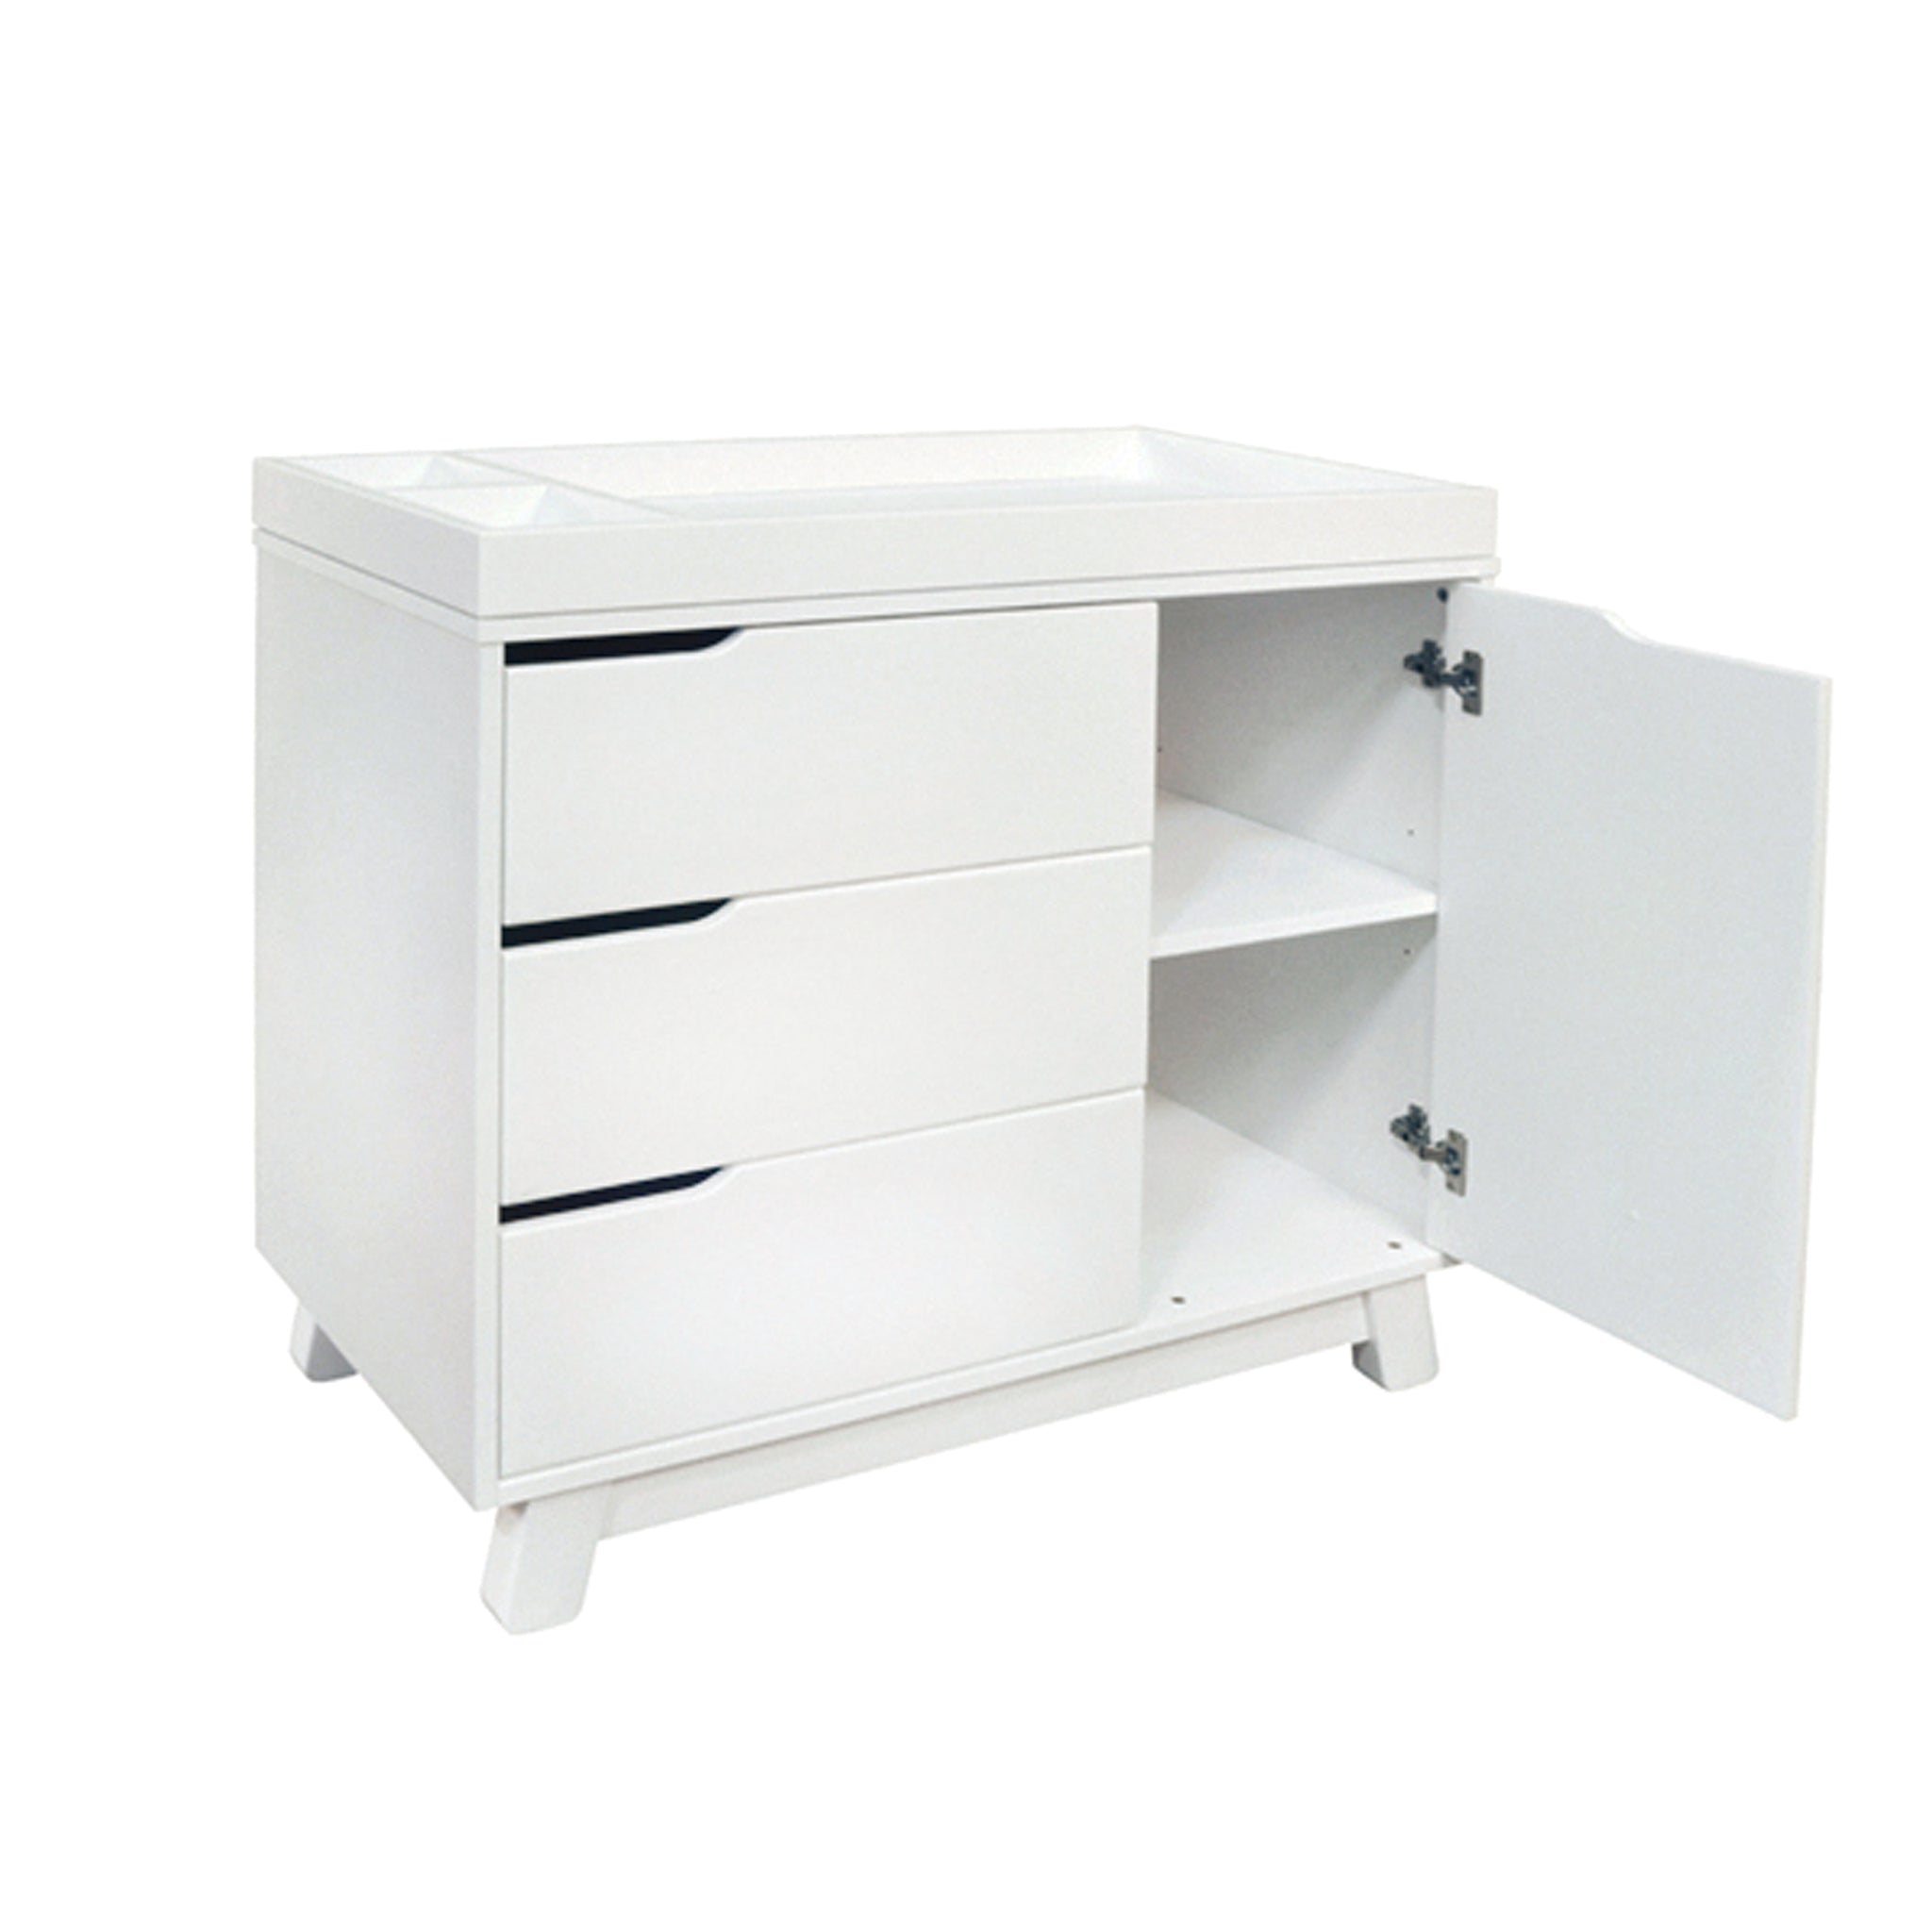 Hudson 3Drawer Changer Dresser with Removable Changing Tray